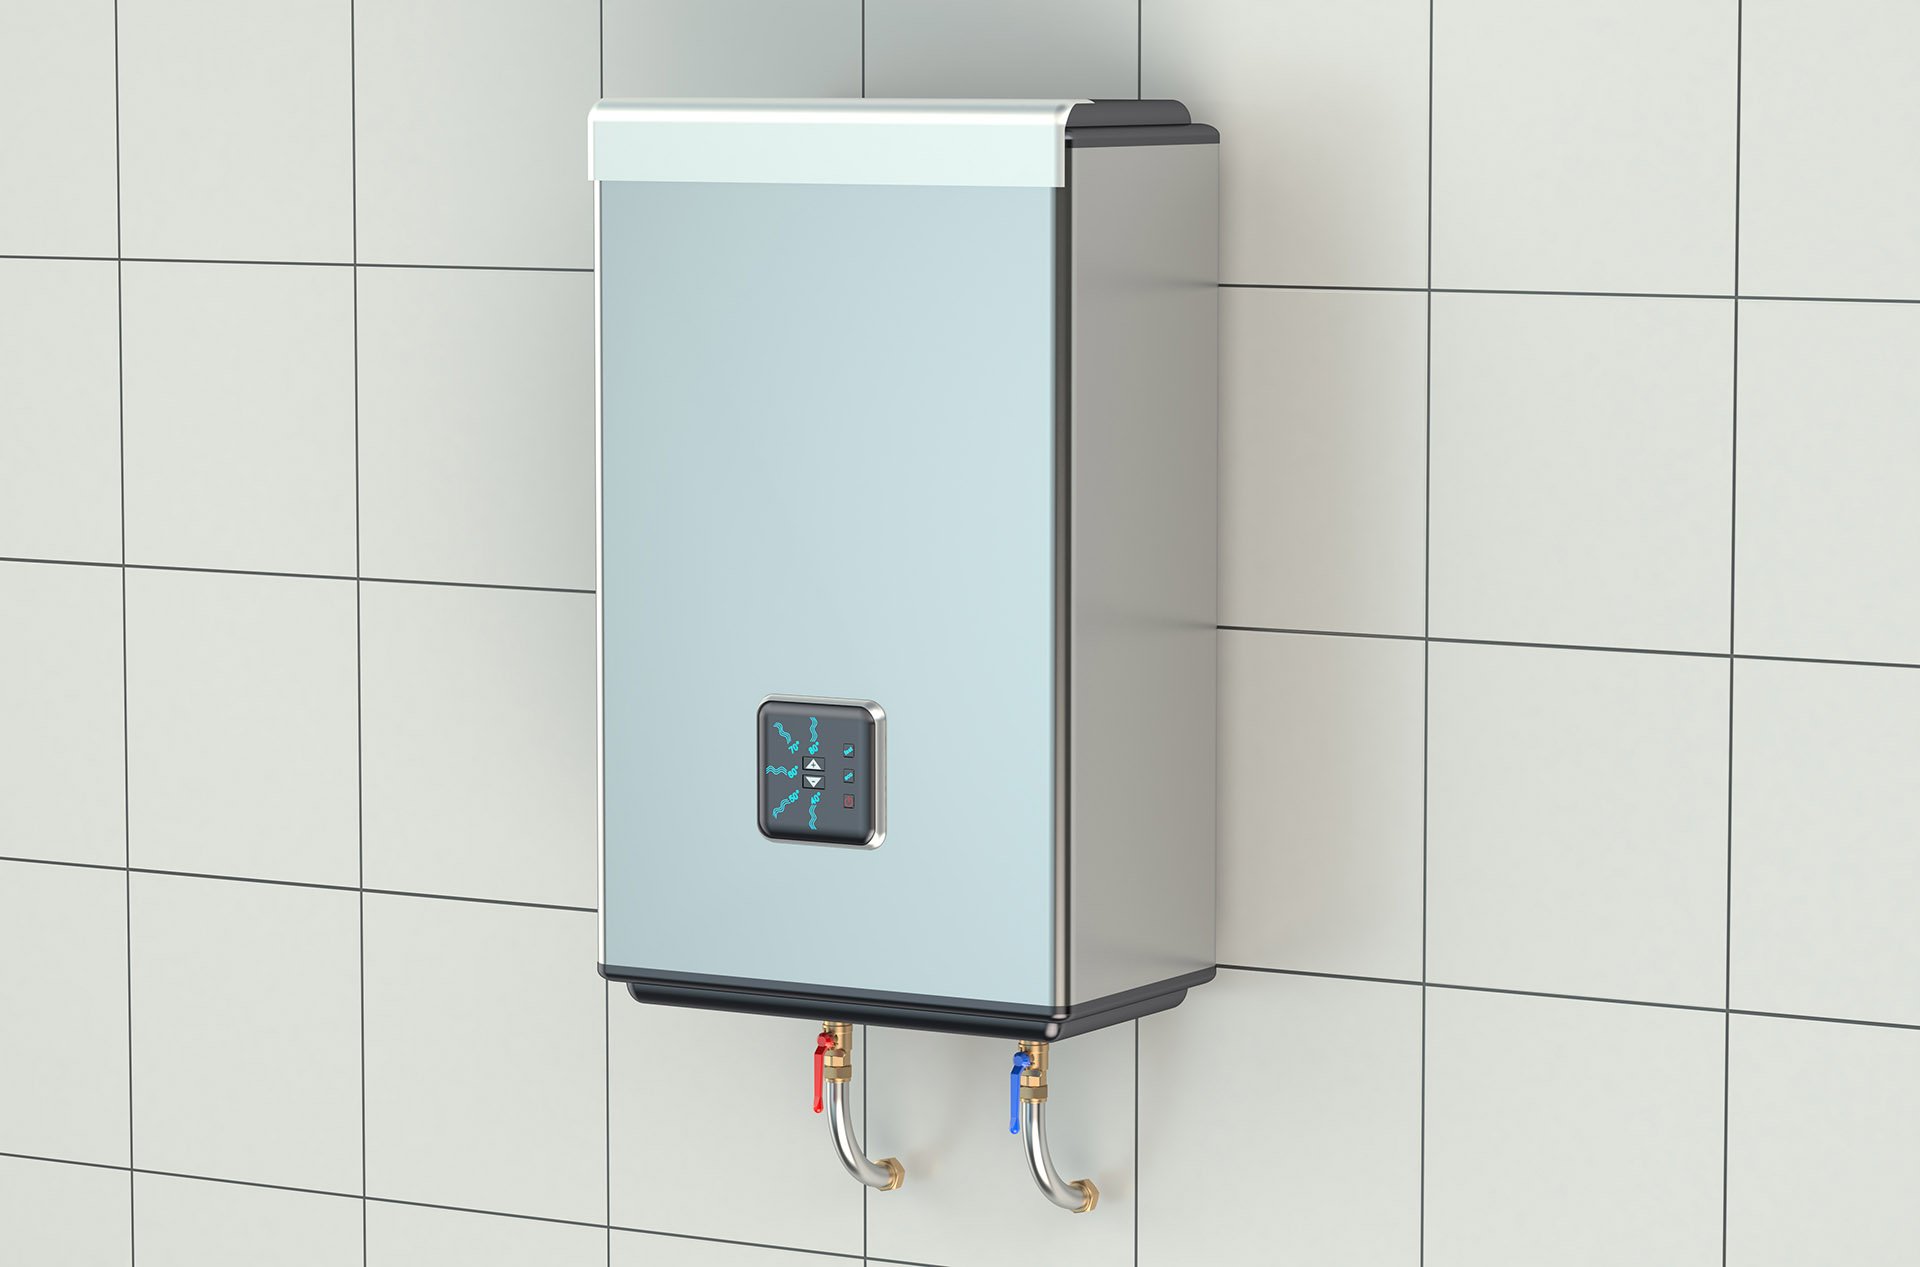 A wall mounted water heater on the side of a tiled wall.